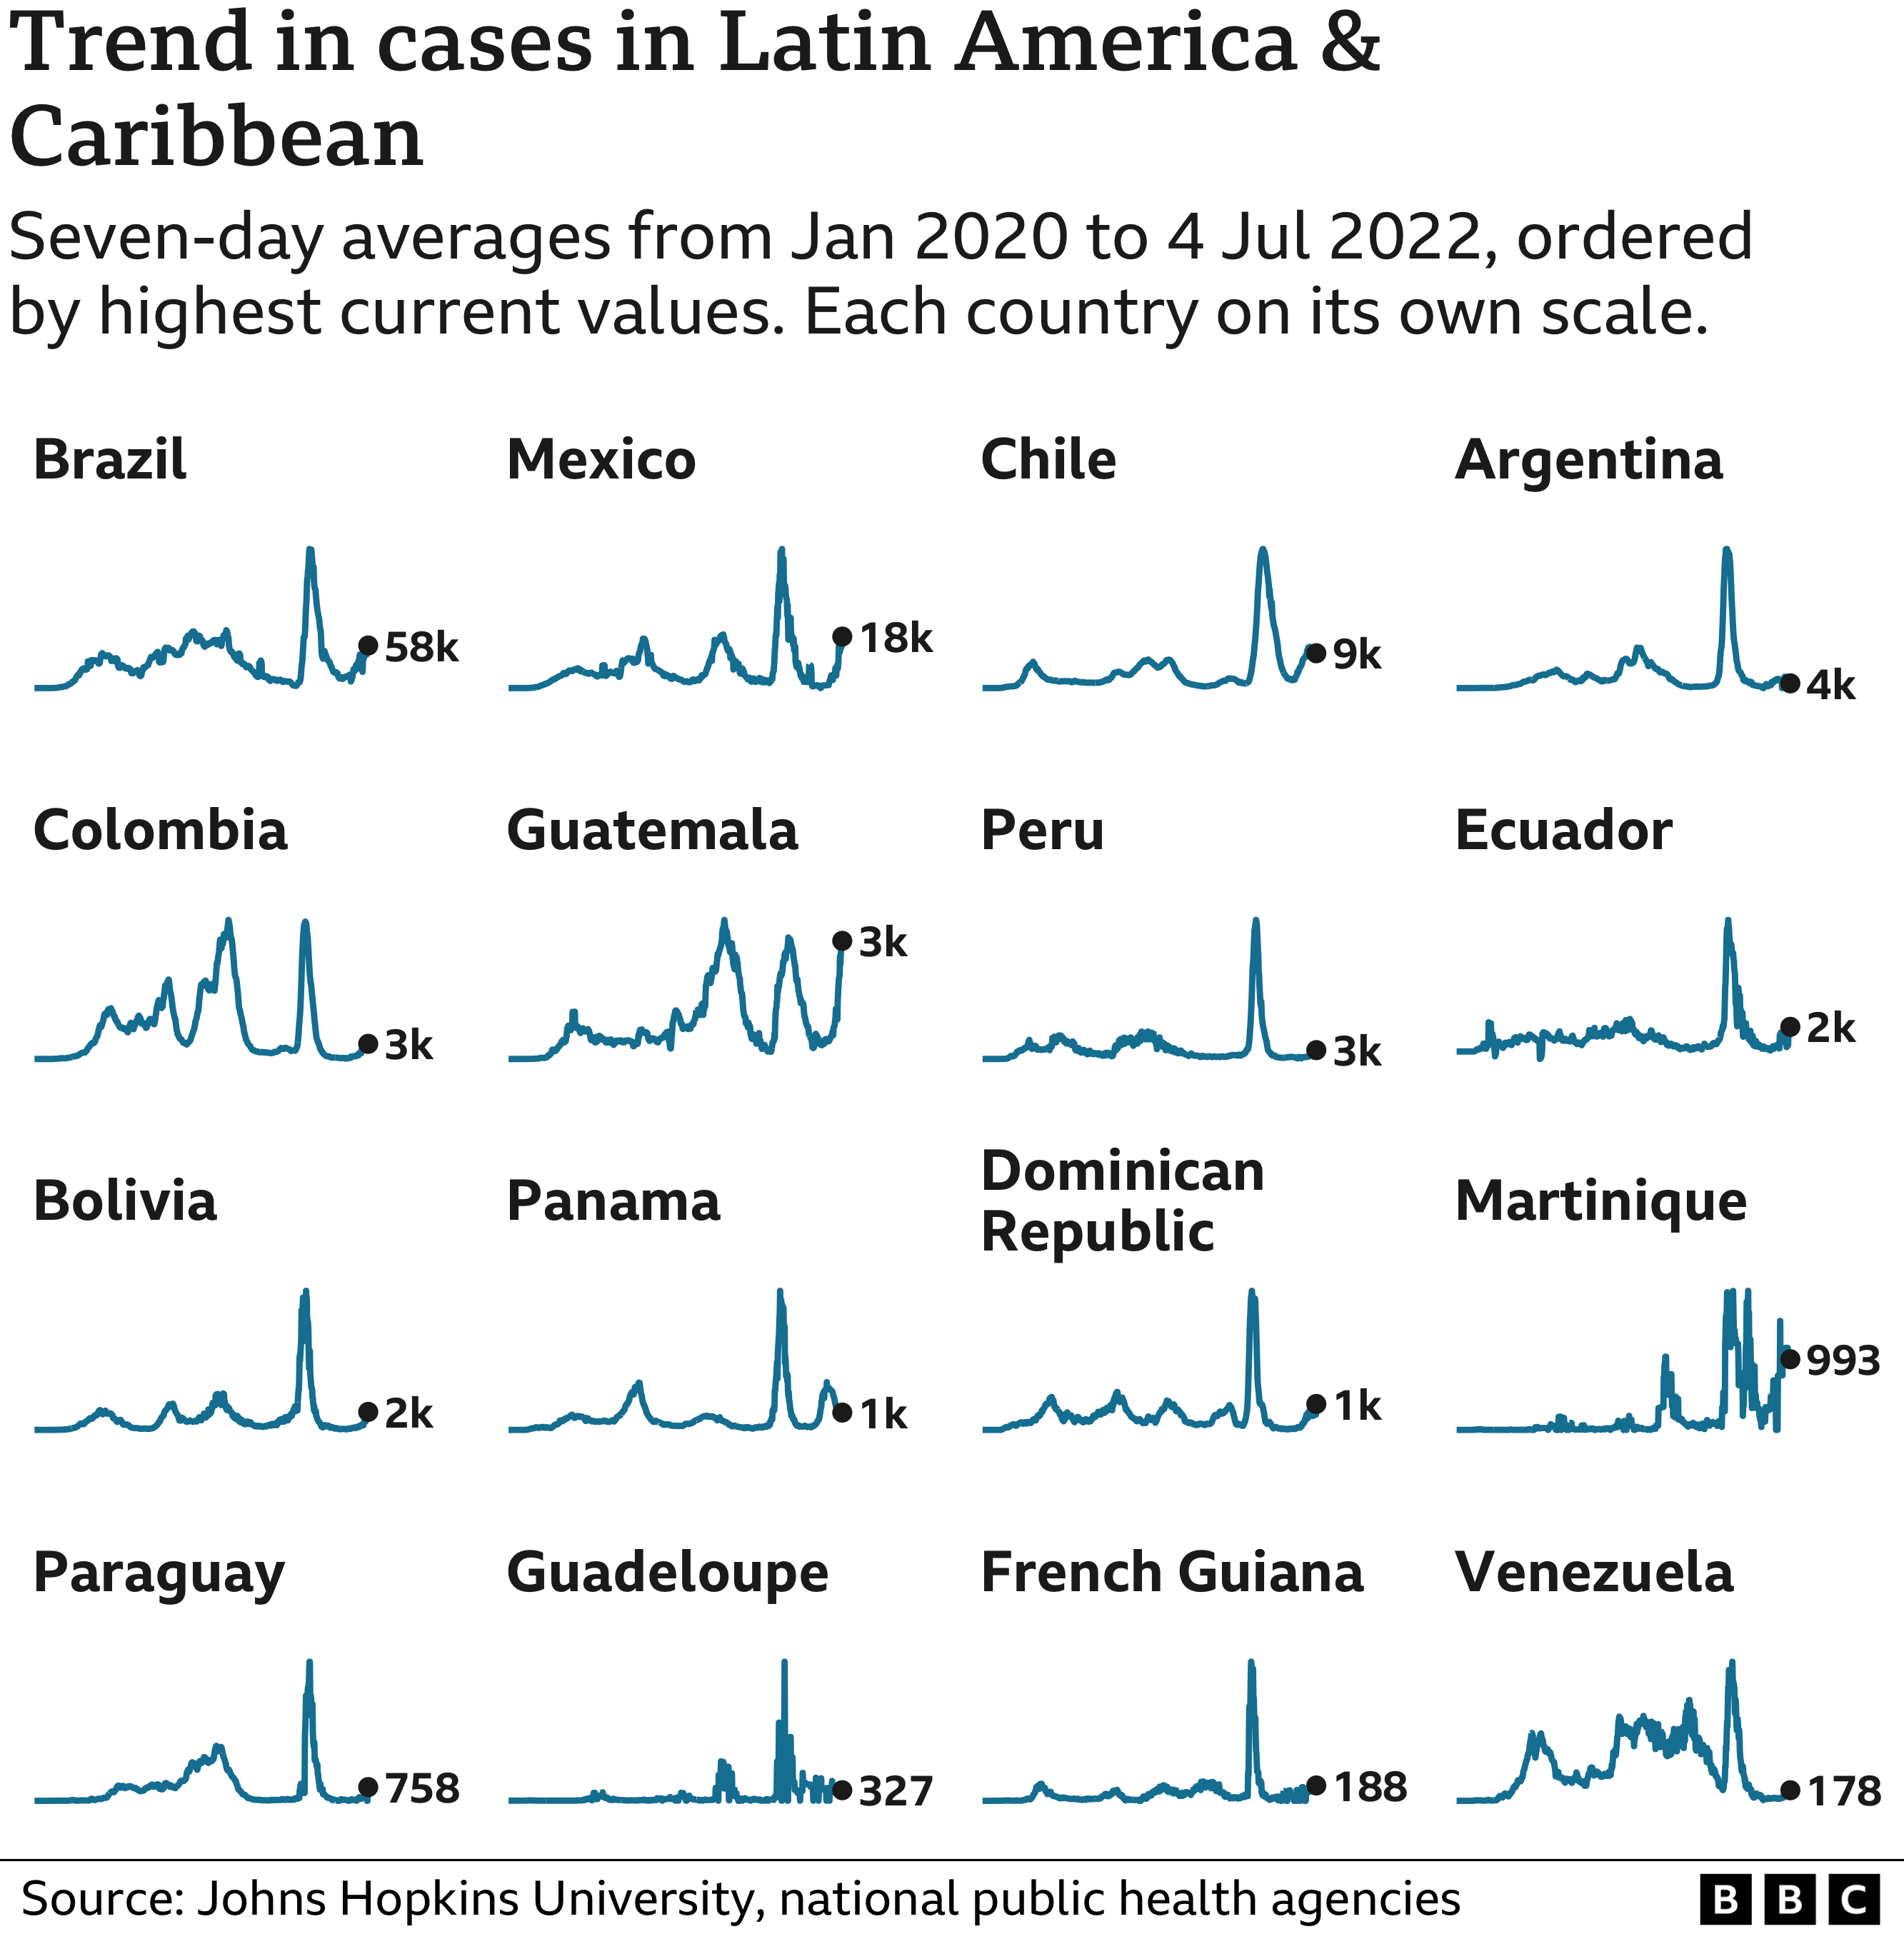 Trend in cases chart for countries in Latin America and Caribbean